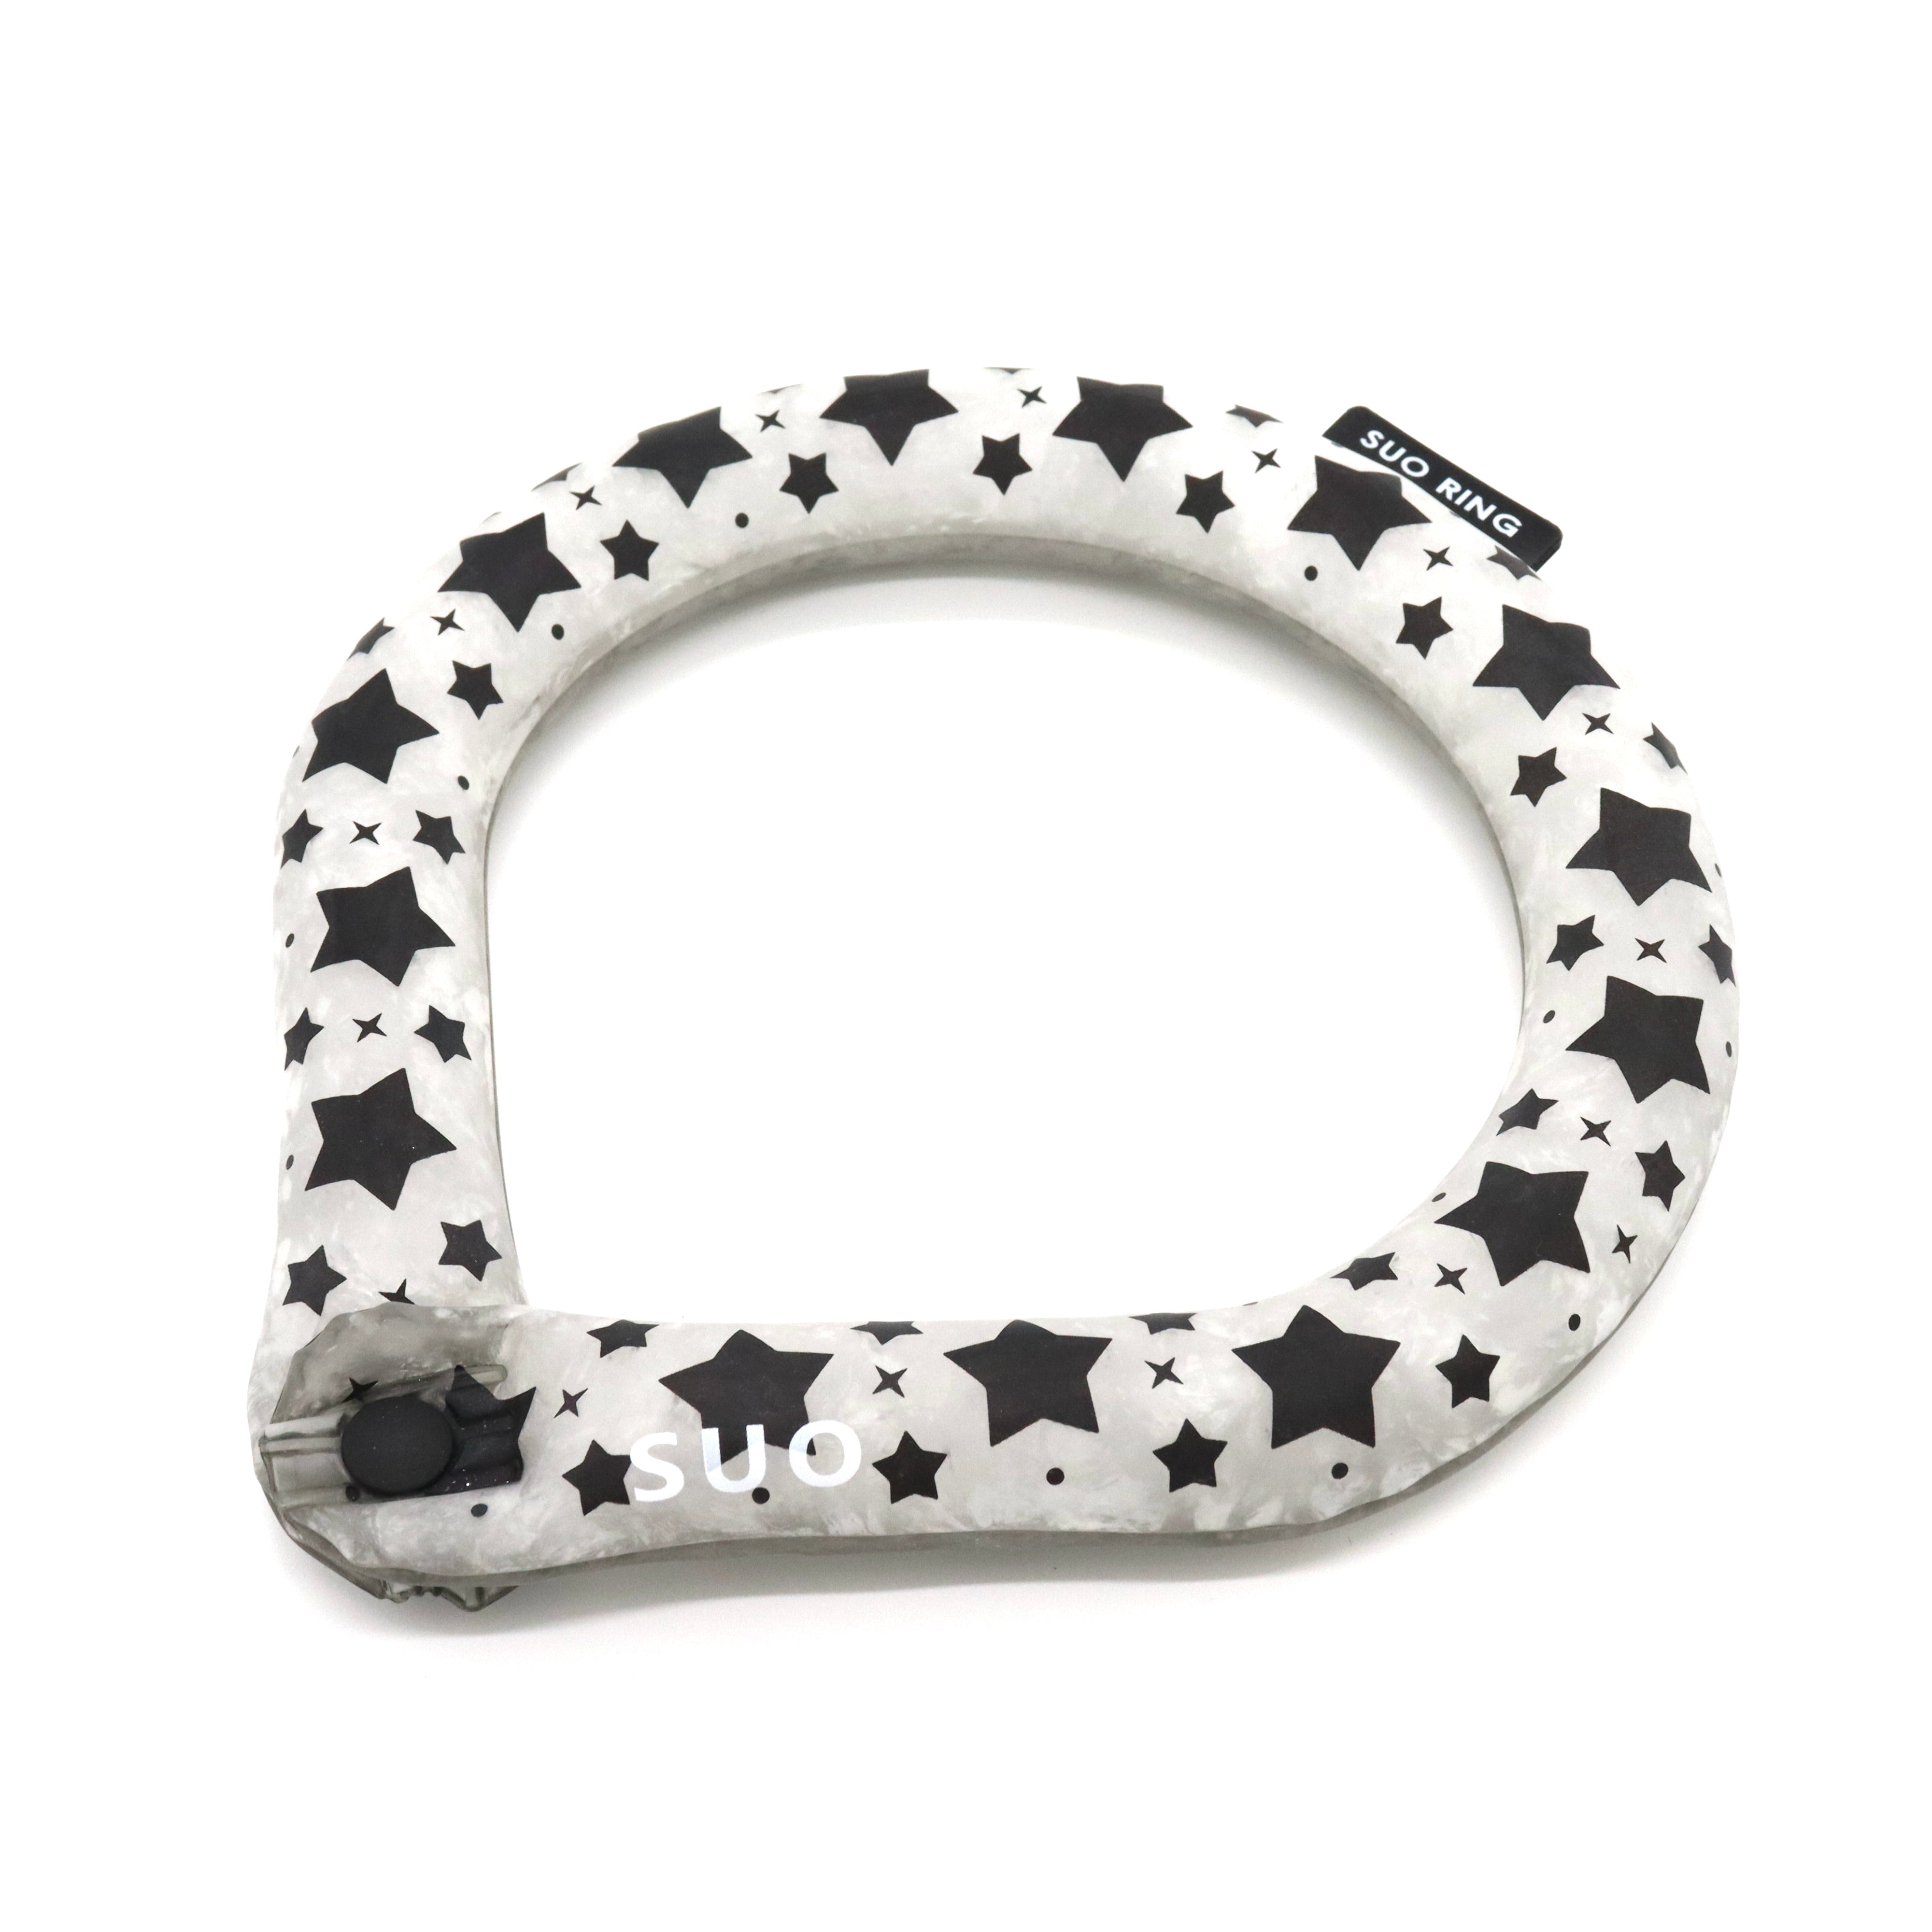 SUO RING 28°ICE for dogs star ボタン付